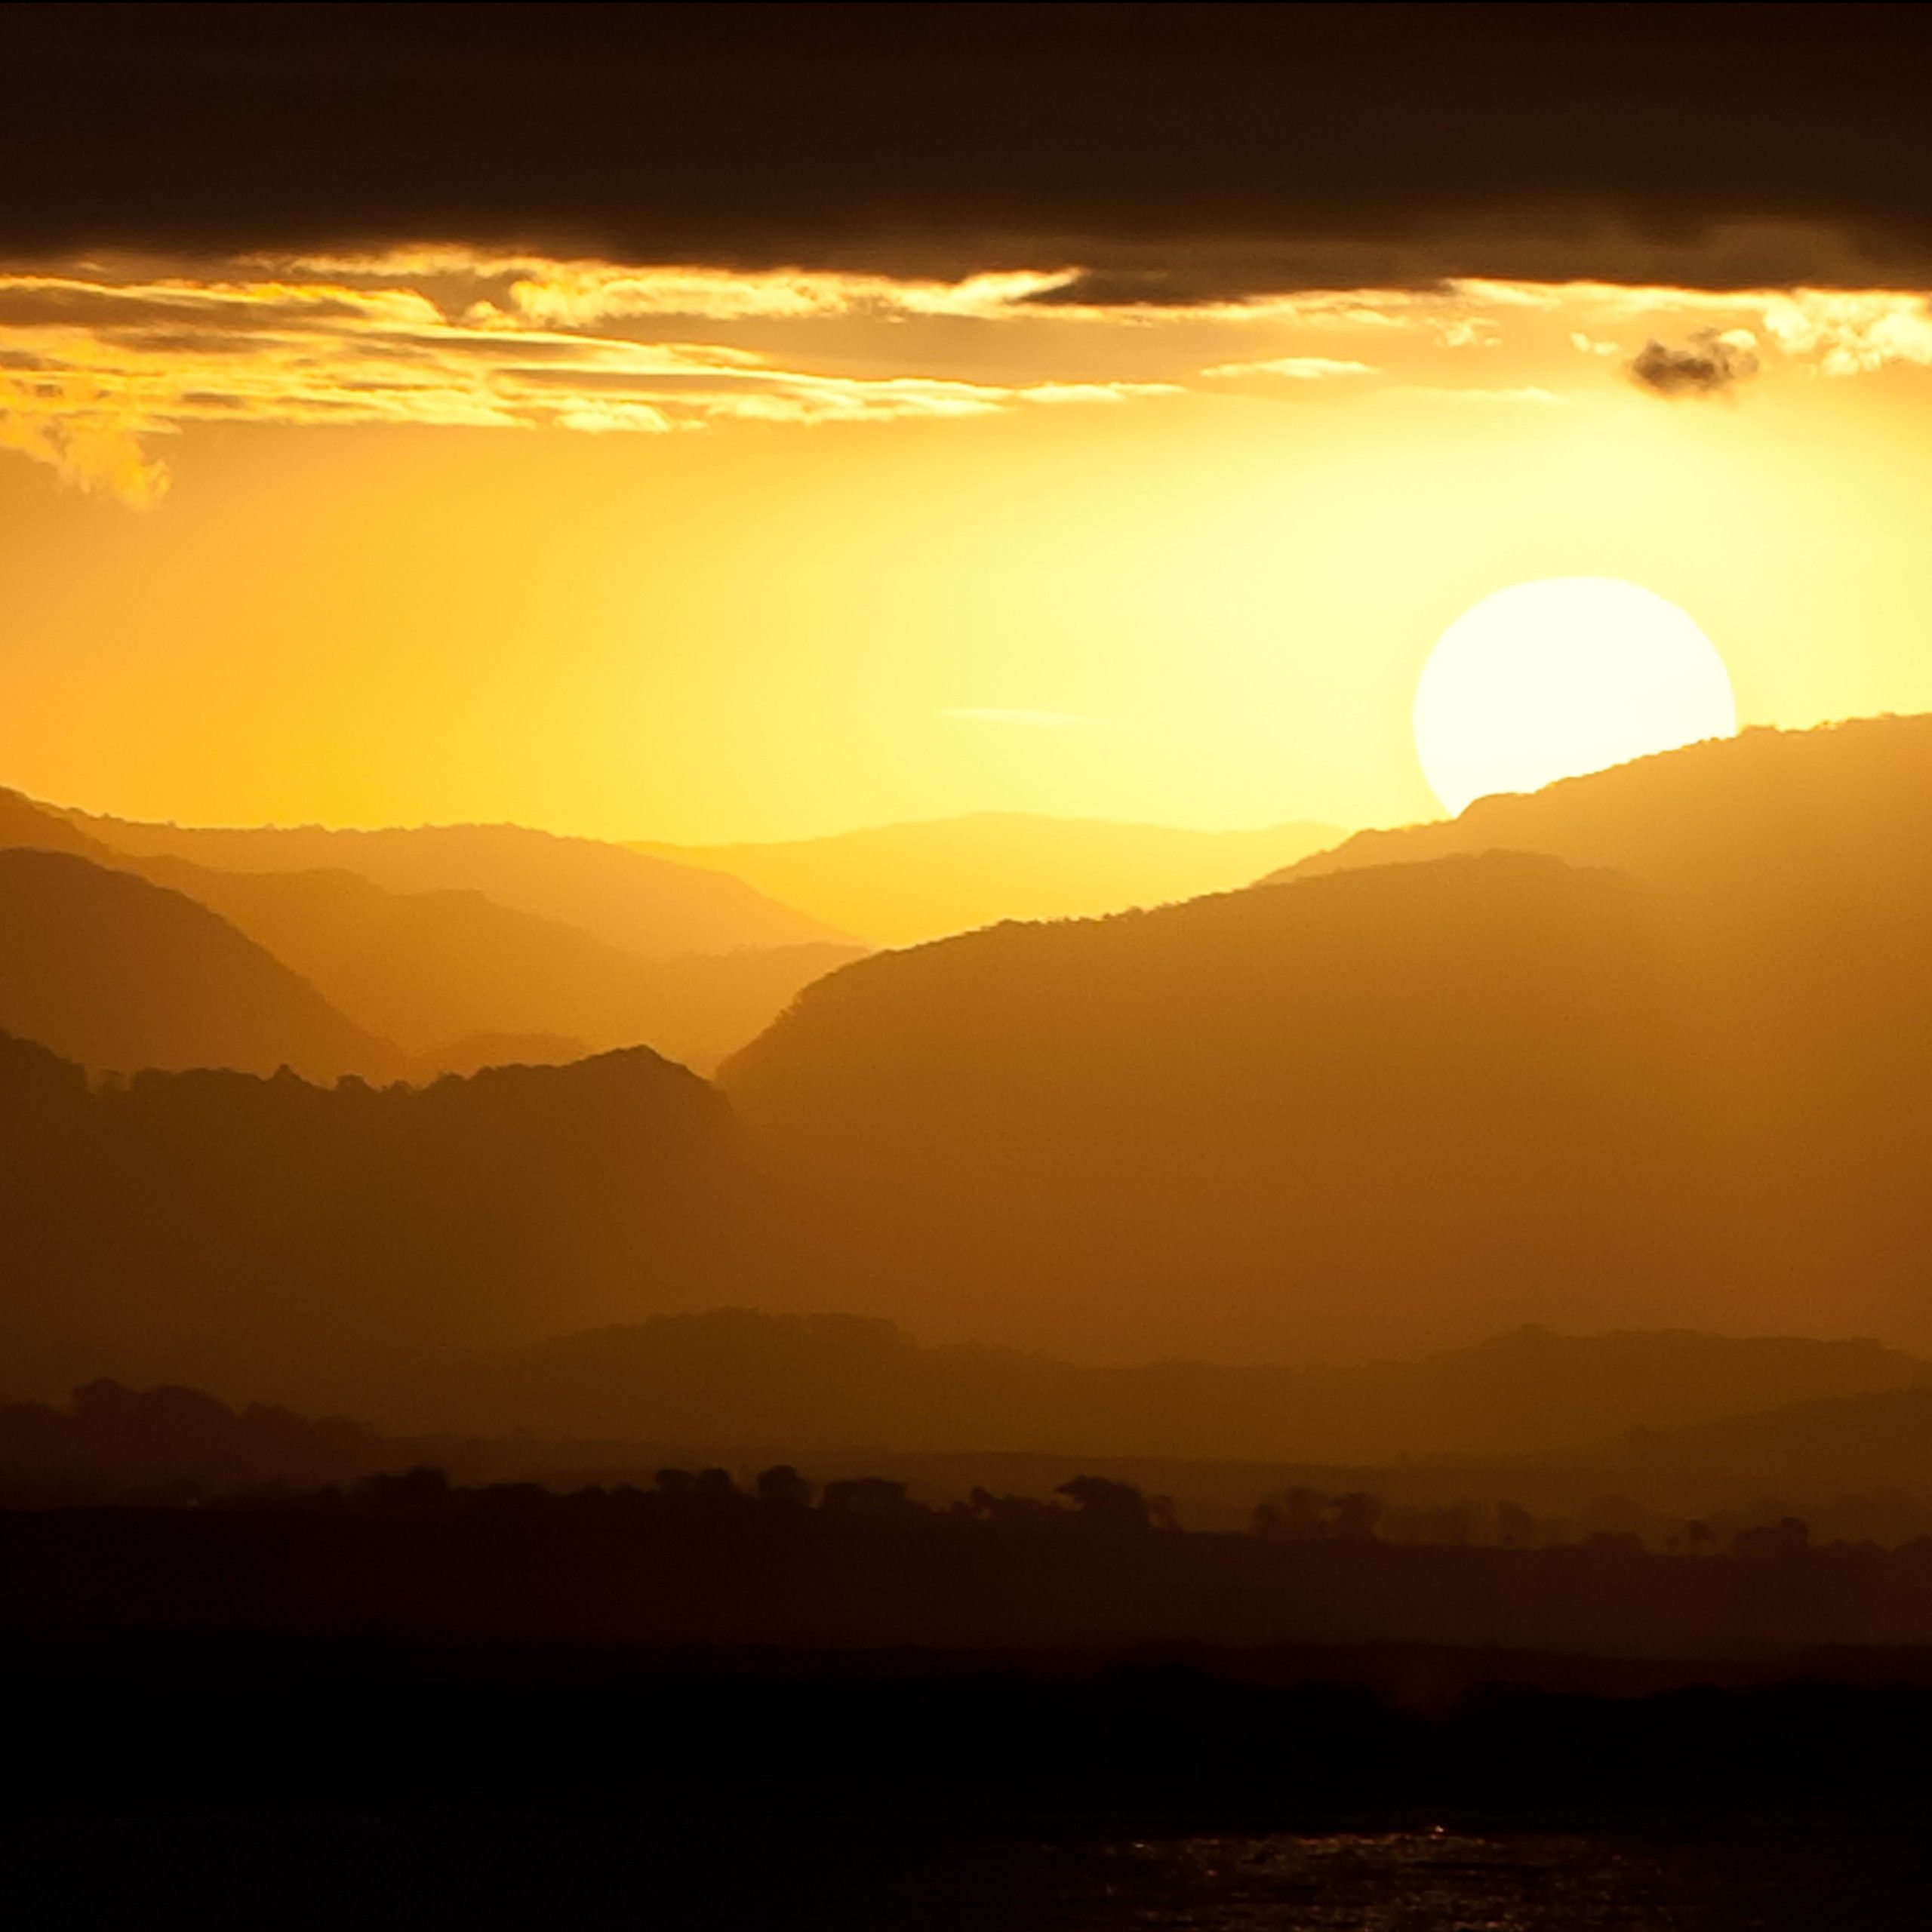 Sunset 4K Wallpaper, Landscape, Mountains, Yellow sky, Silhouette, Nature